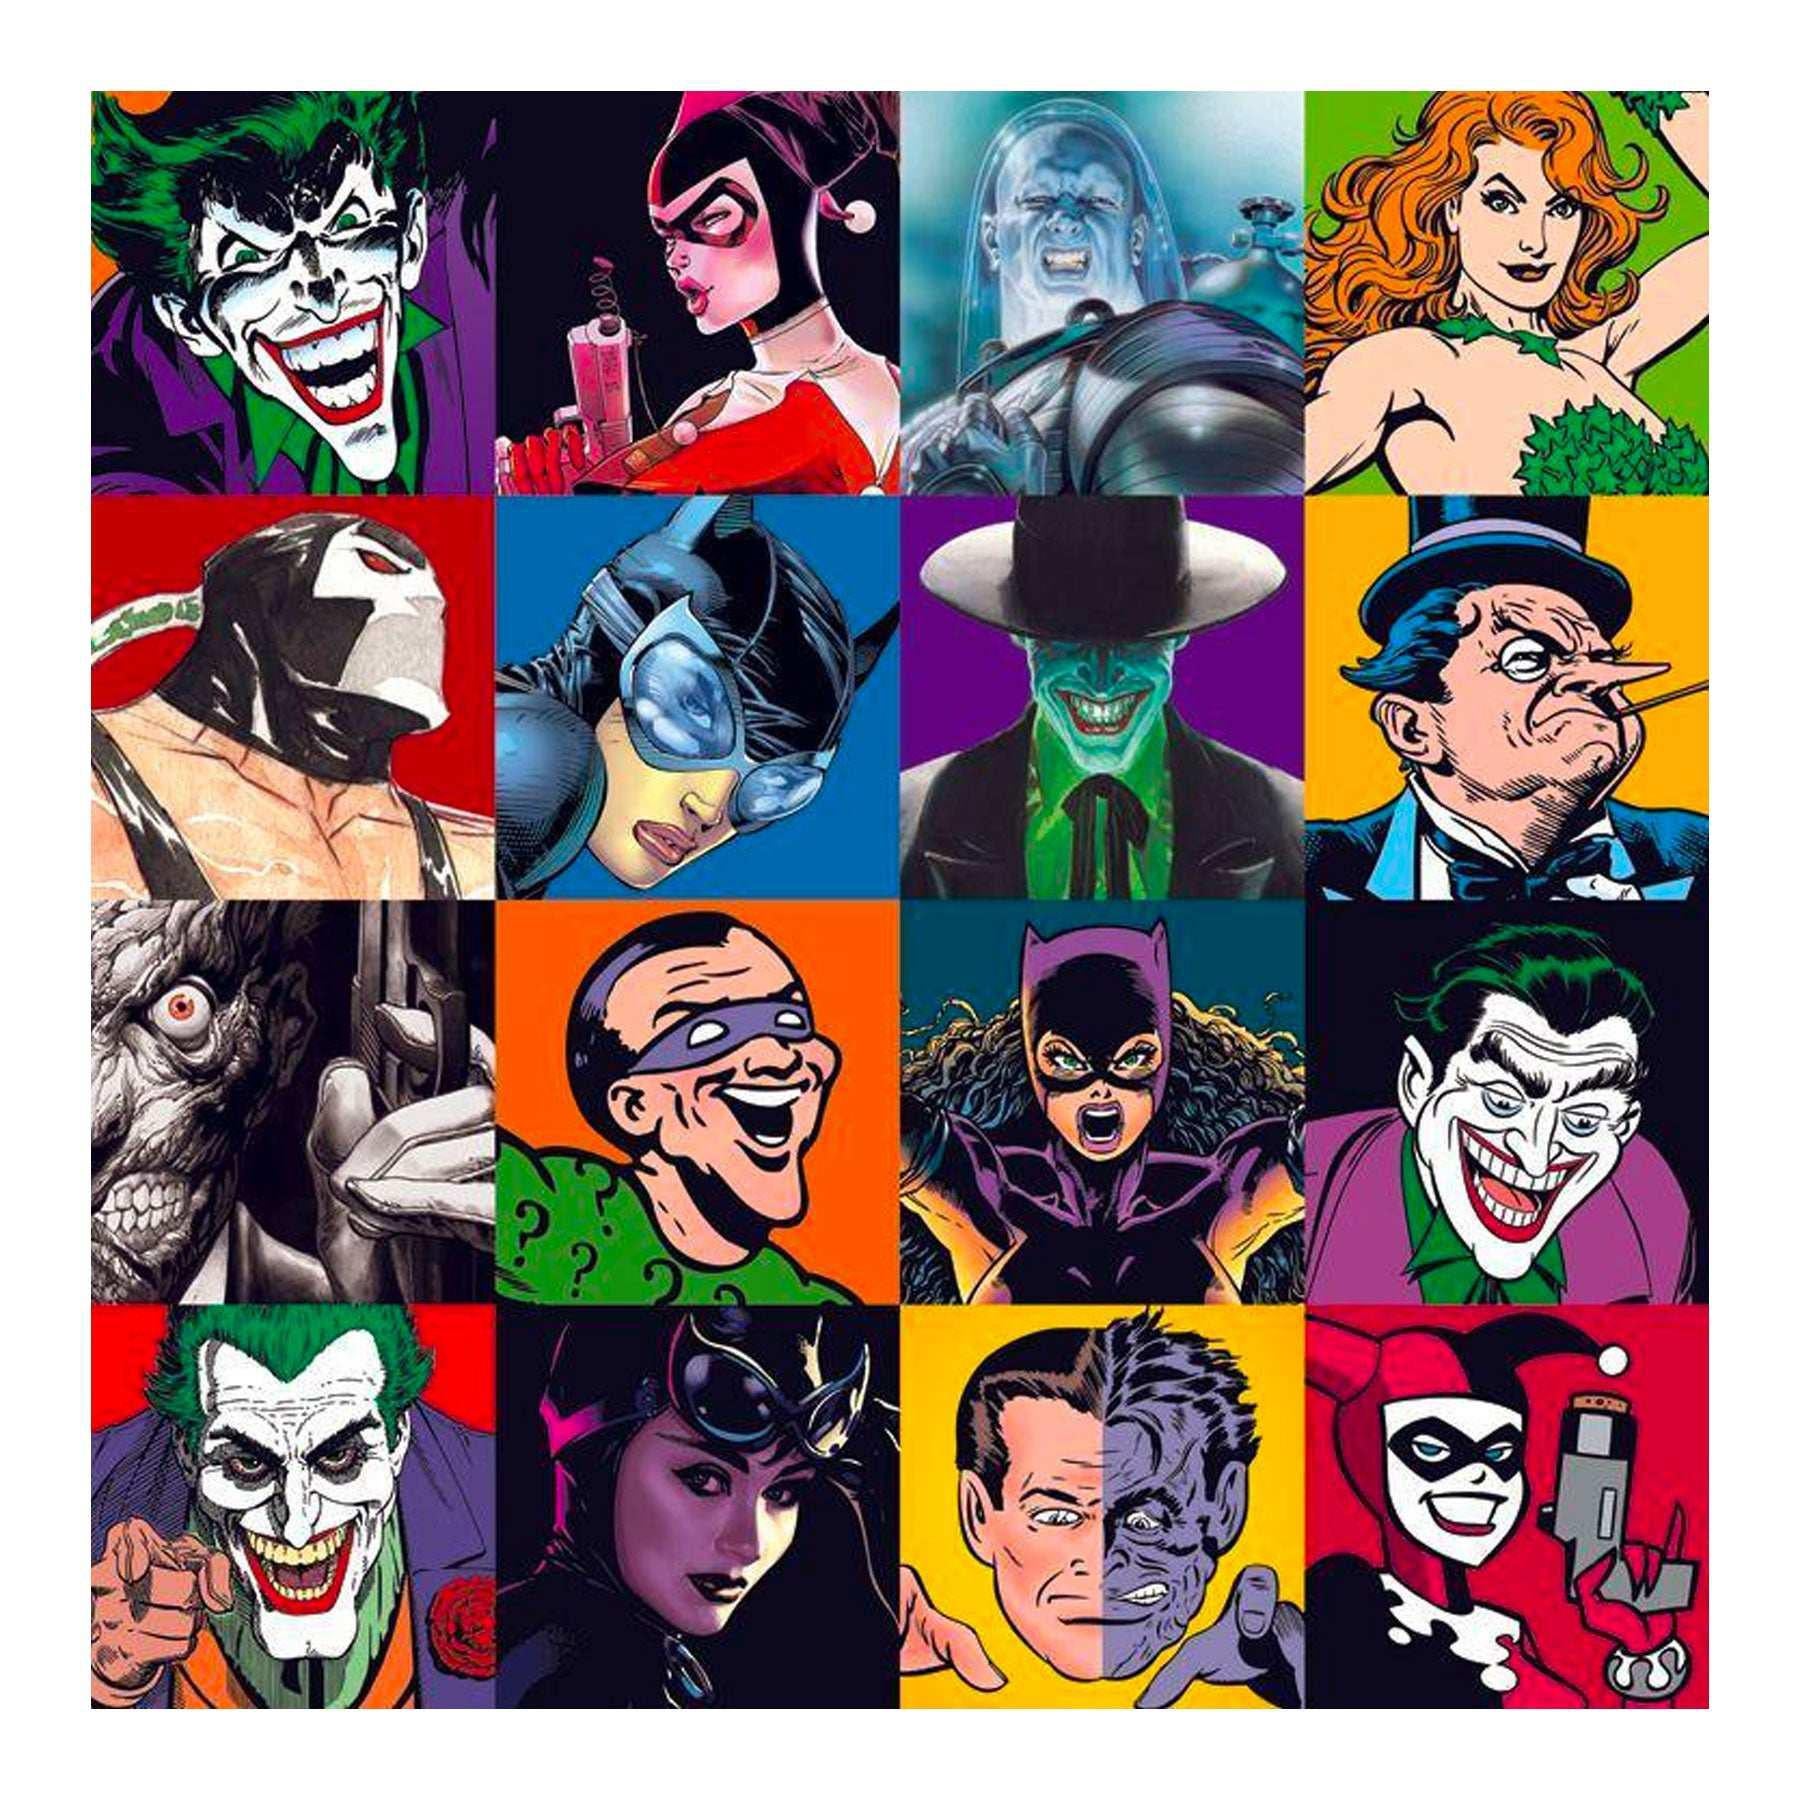 MEDIUM: Giclée on Canvas Edition
SIZE: 31" x 31"
EDITION SIZE: 100
ARTIST:  Various Artists
SKU: CP1521D 

ABOUT THE IMAGE: Batman and his villains have and continue to connect with fans all over the world in their seven-decade history. They are the